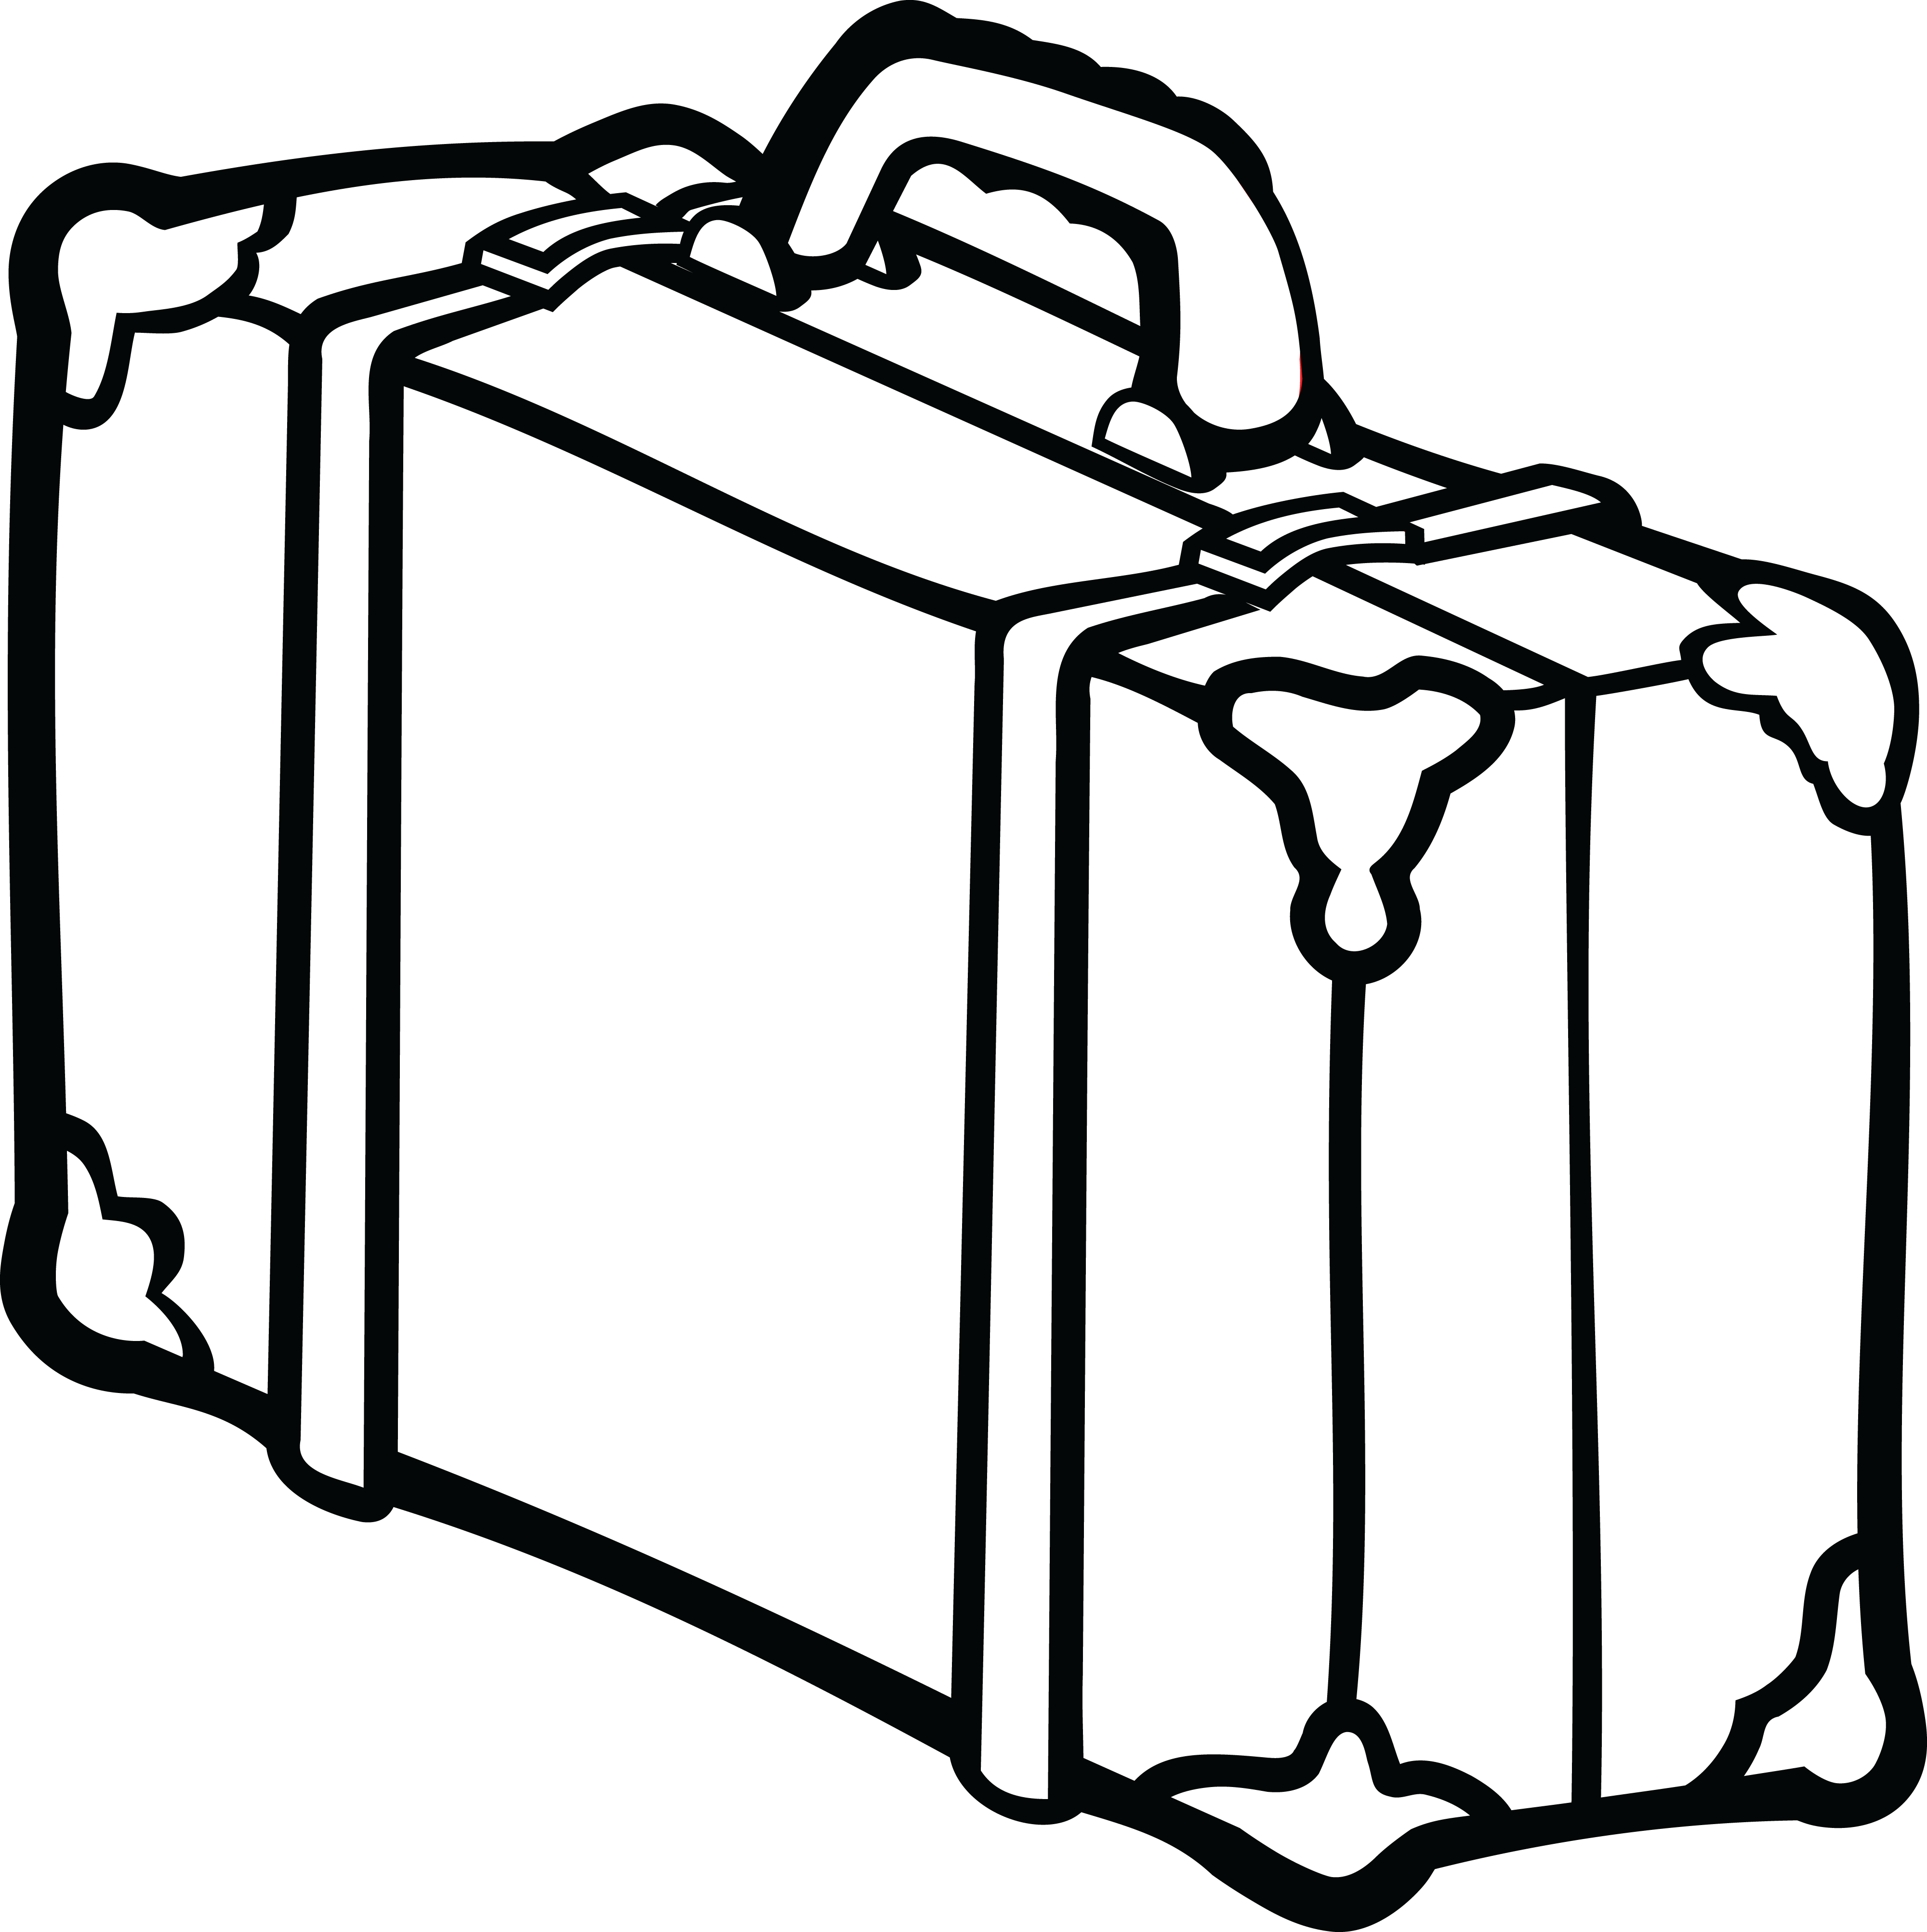 Suitcase clipart black and white 3 » Clipart Station.